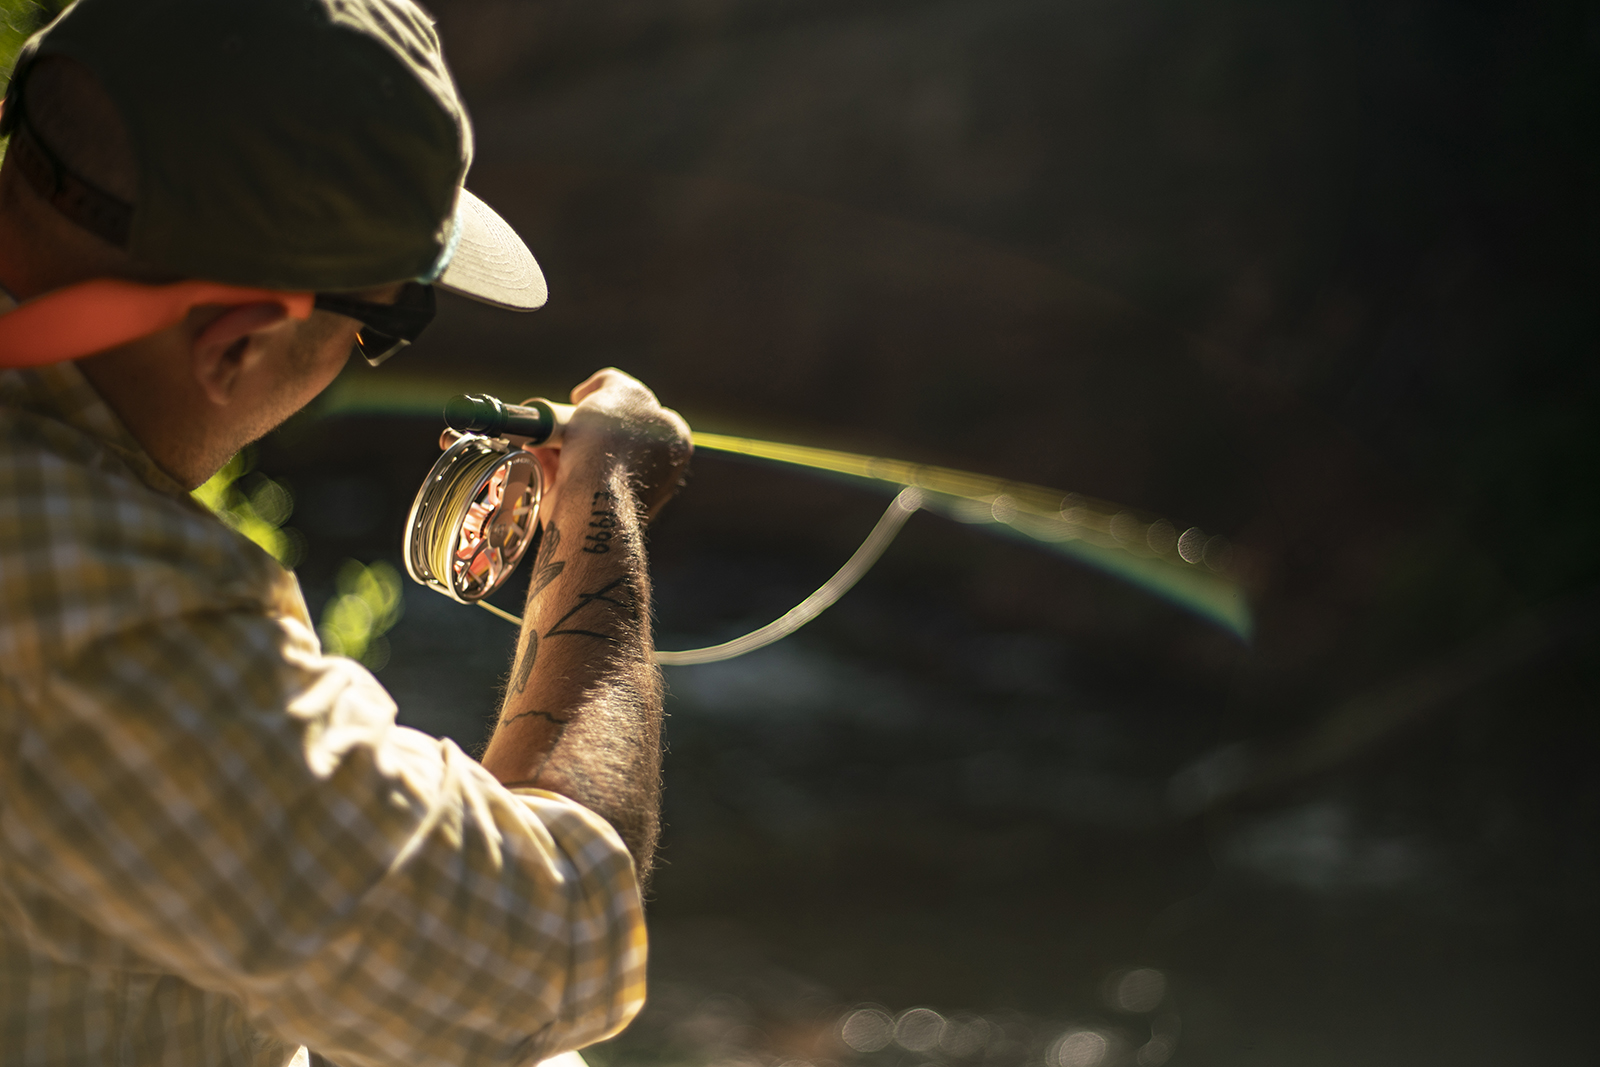 You'll be hookin' trout in no time with these fly fishing